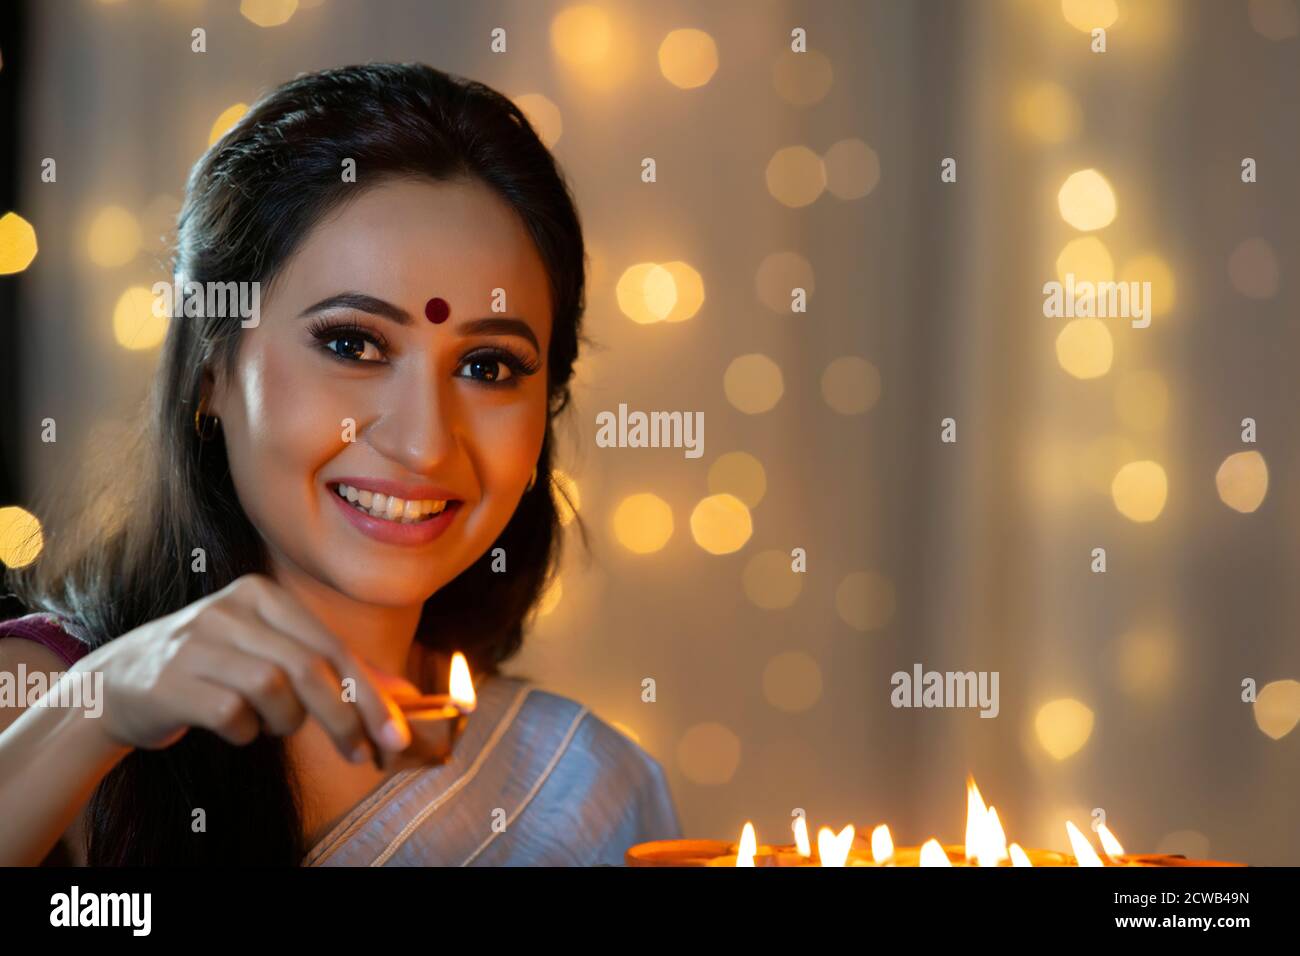 Woman smiling with a diya in her hand Stock Photo